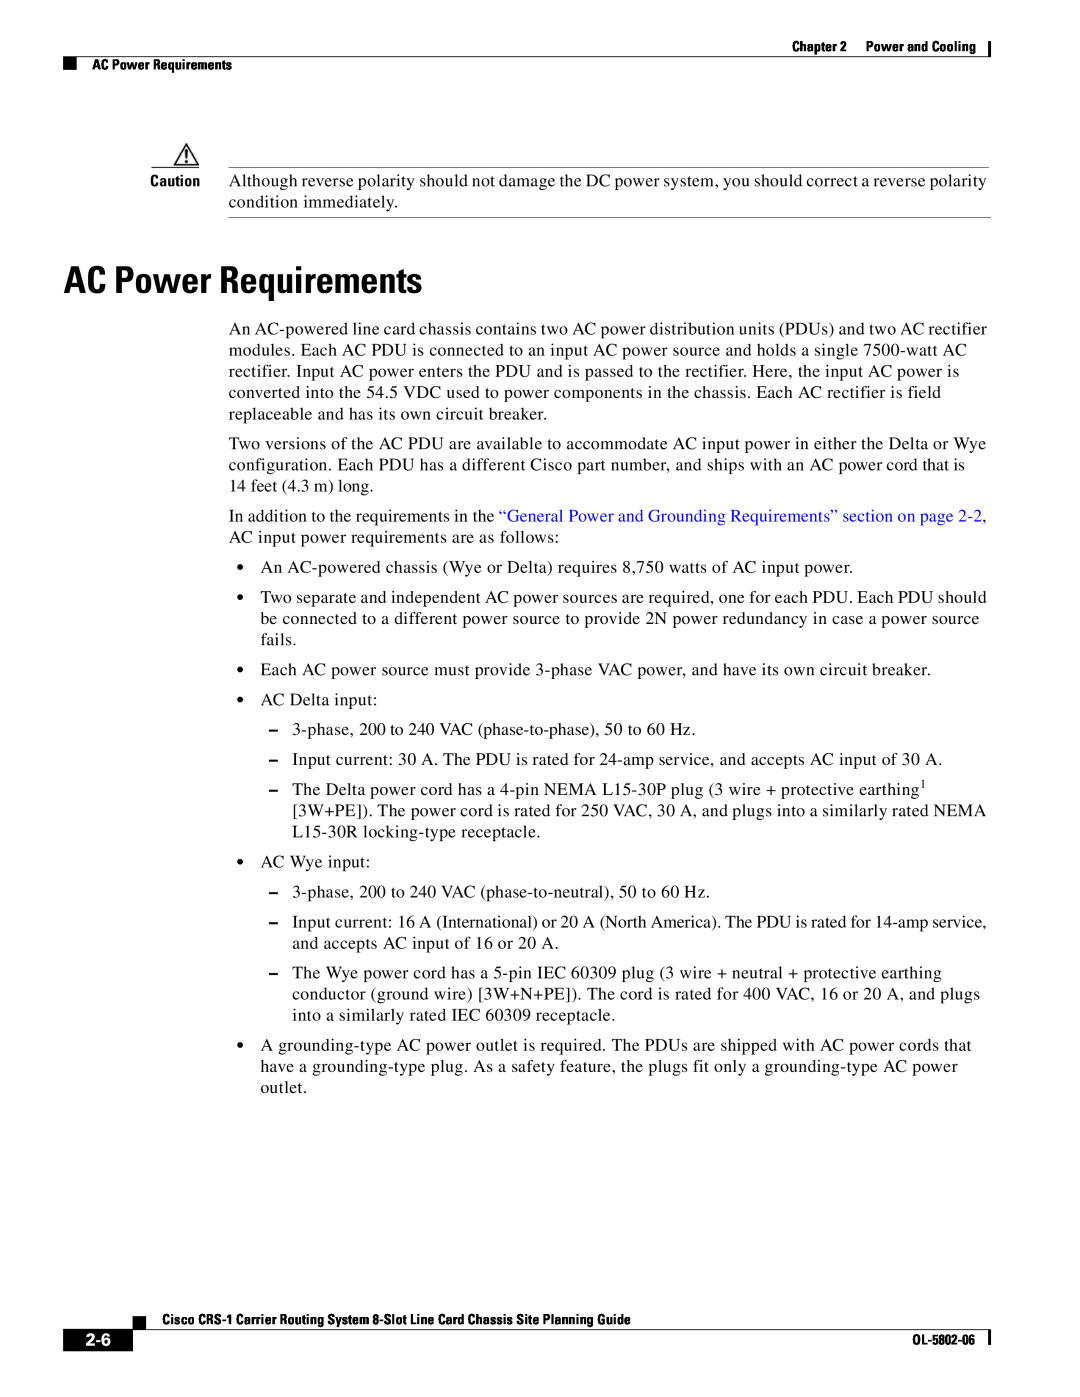 Cisco Systems CRS-1 manual AC Power Requirements 